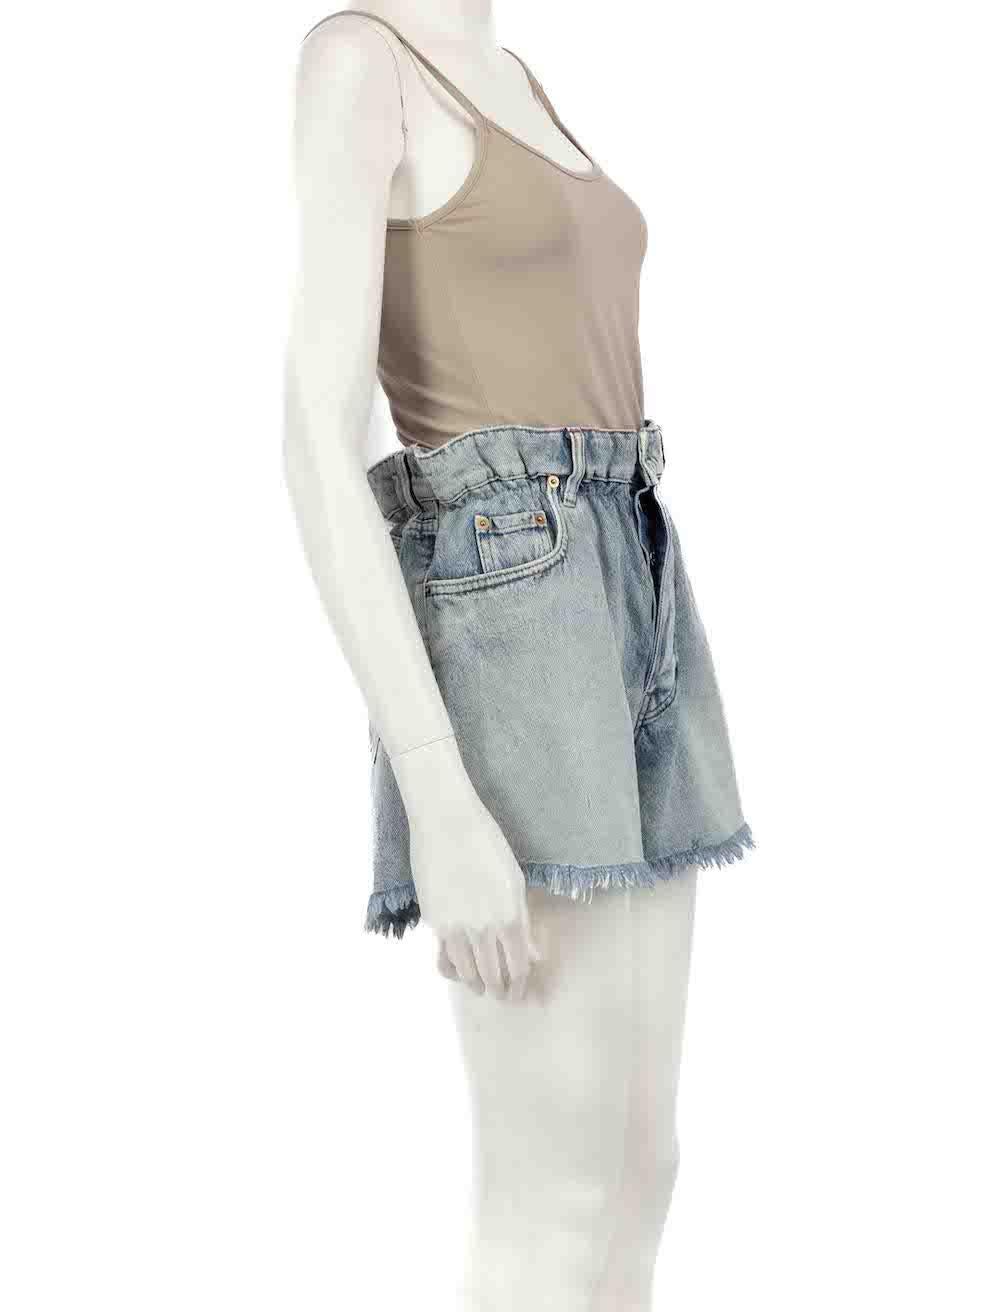 CONDITION is Very good. Minimal wear to shorts is evident. Minimal wear to the elastic waistband at the lining with light discolouration on this used Miu Miu designer resale item. Brand label is partially detached.
 
Details
Blue
Denim
Paperbag